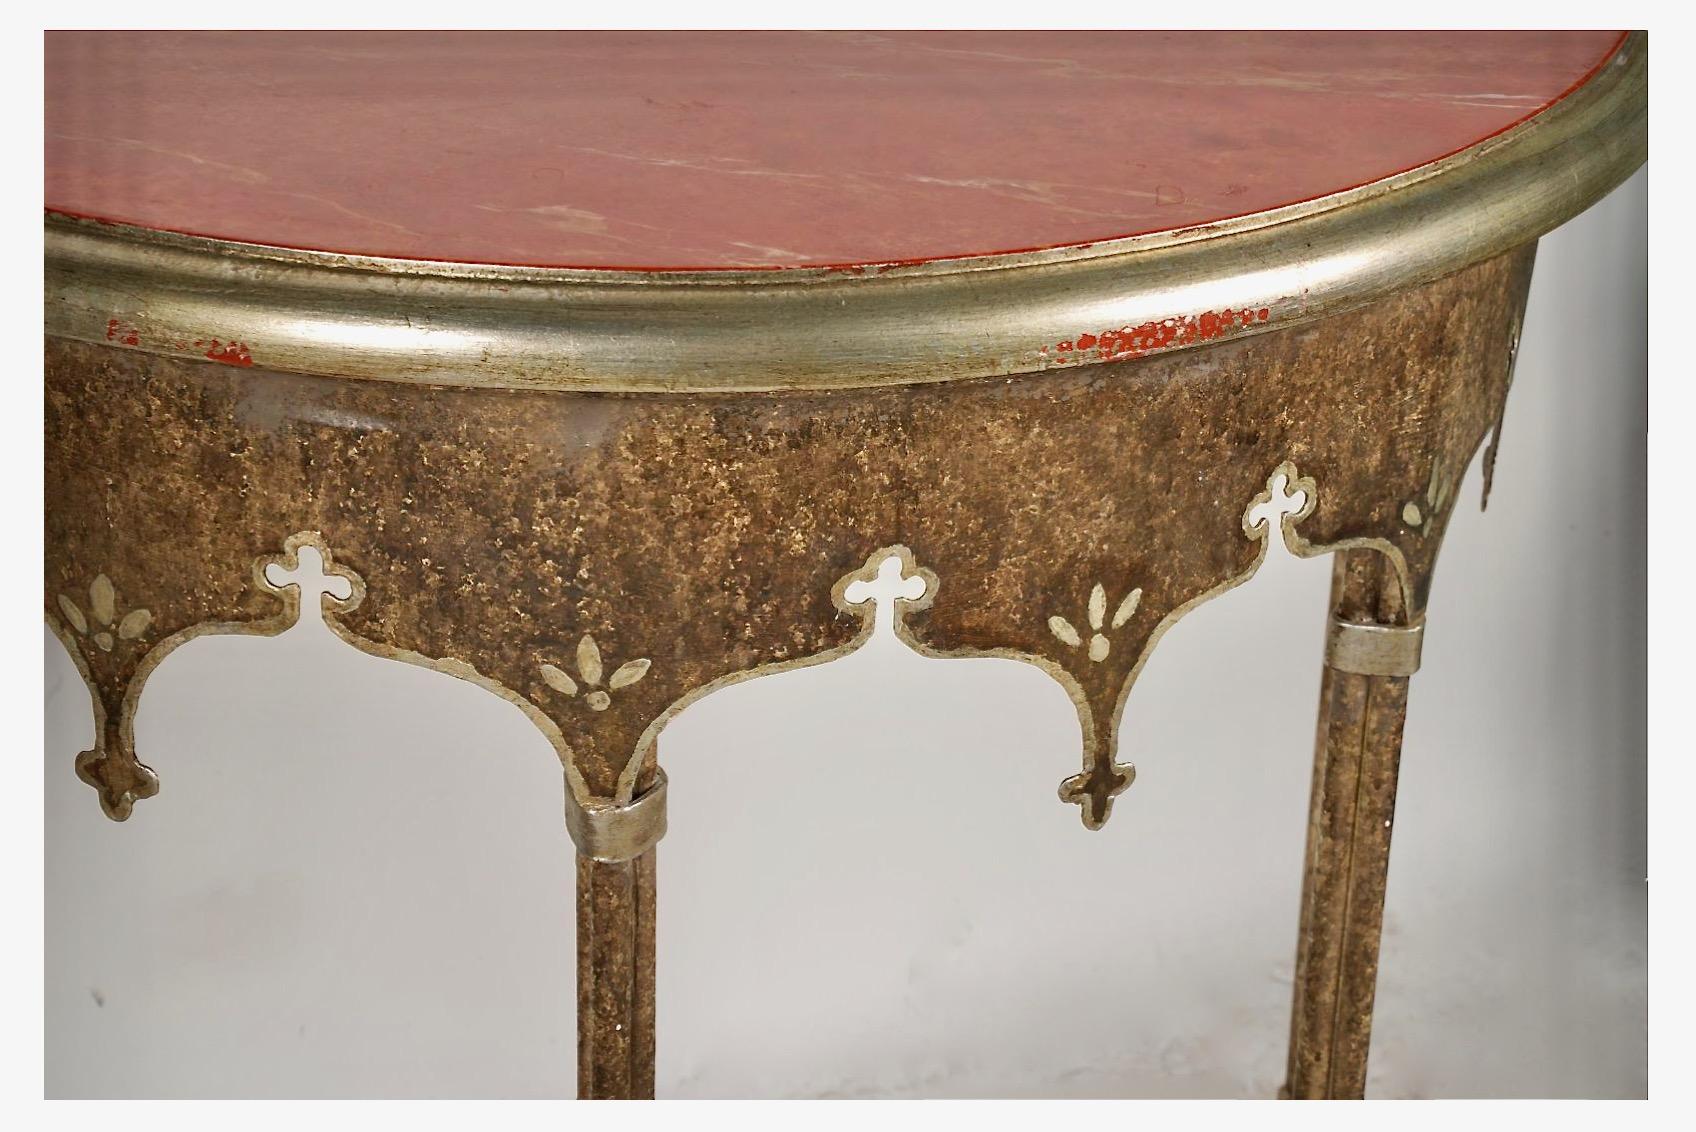 This is a fun pair of petit late 20th century forged iron and faux marble demi-lune consoles. The demi-lunes are beautifully executed in forged iron, tole and faux marble. The iron surfaces have been detailed in patinated gilt work. Both consoles